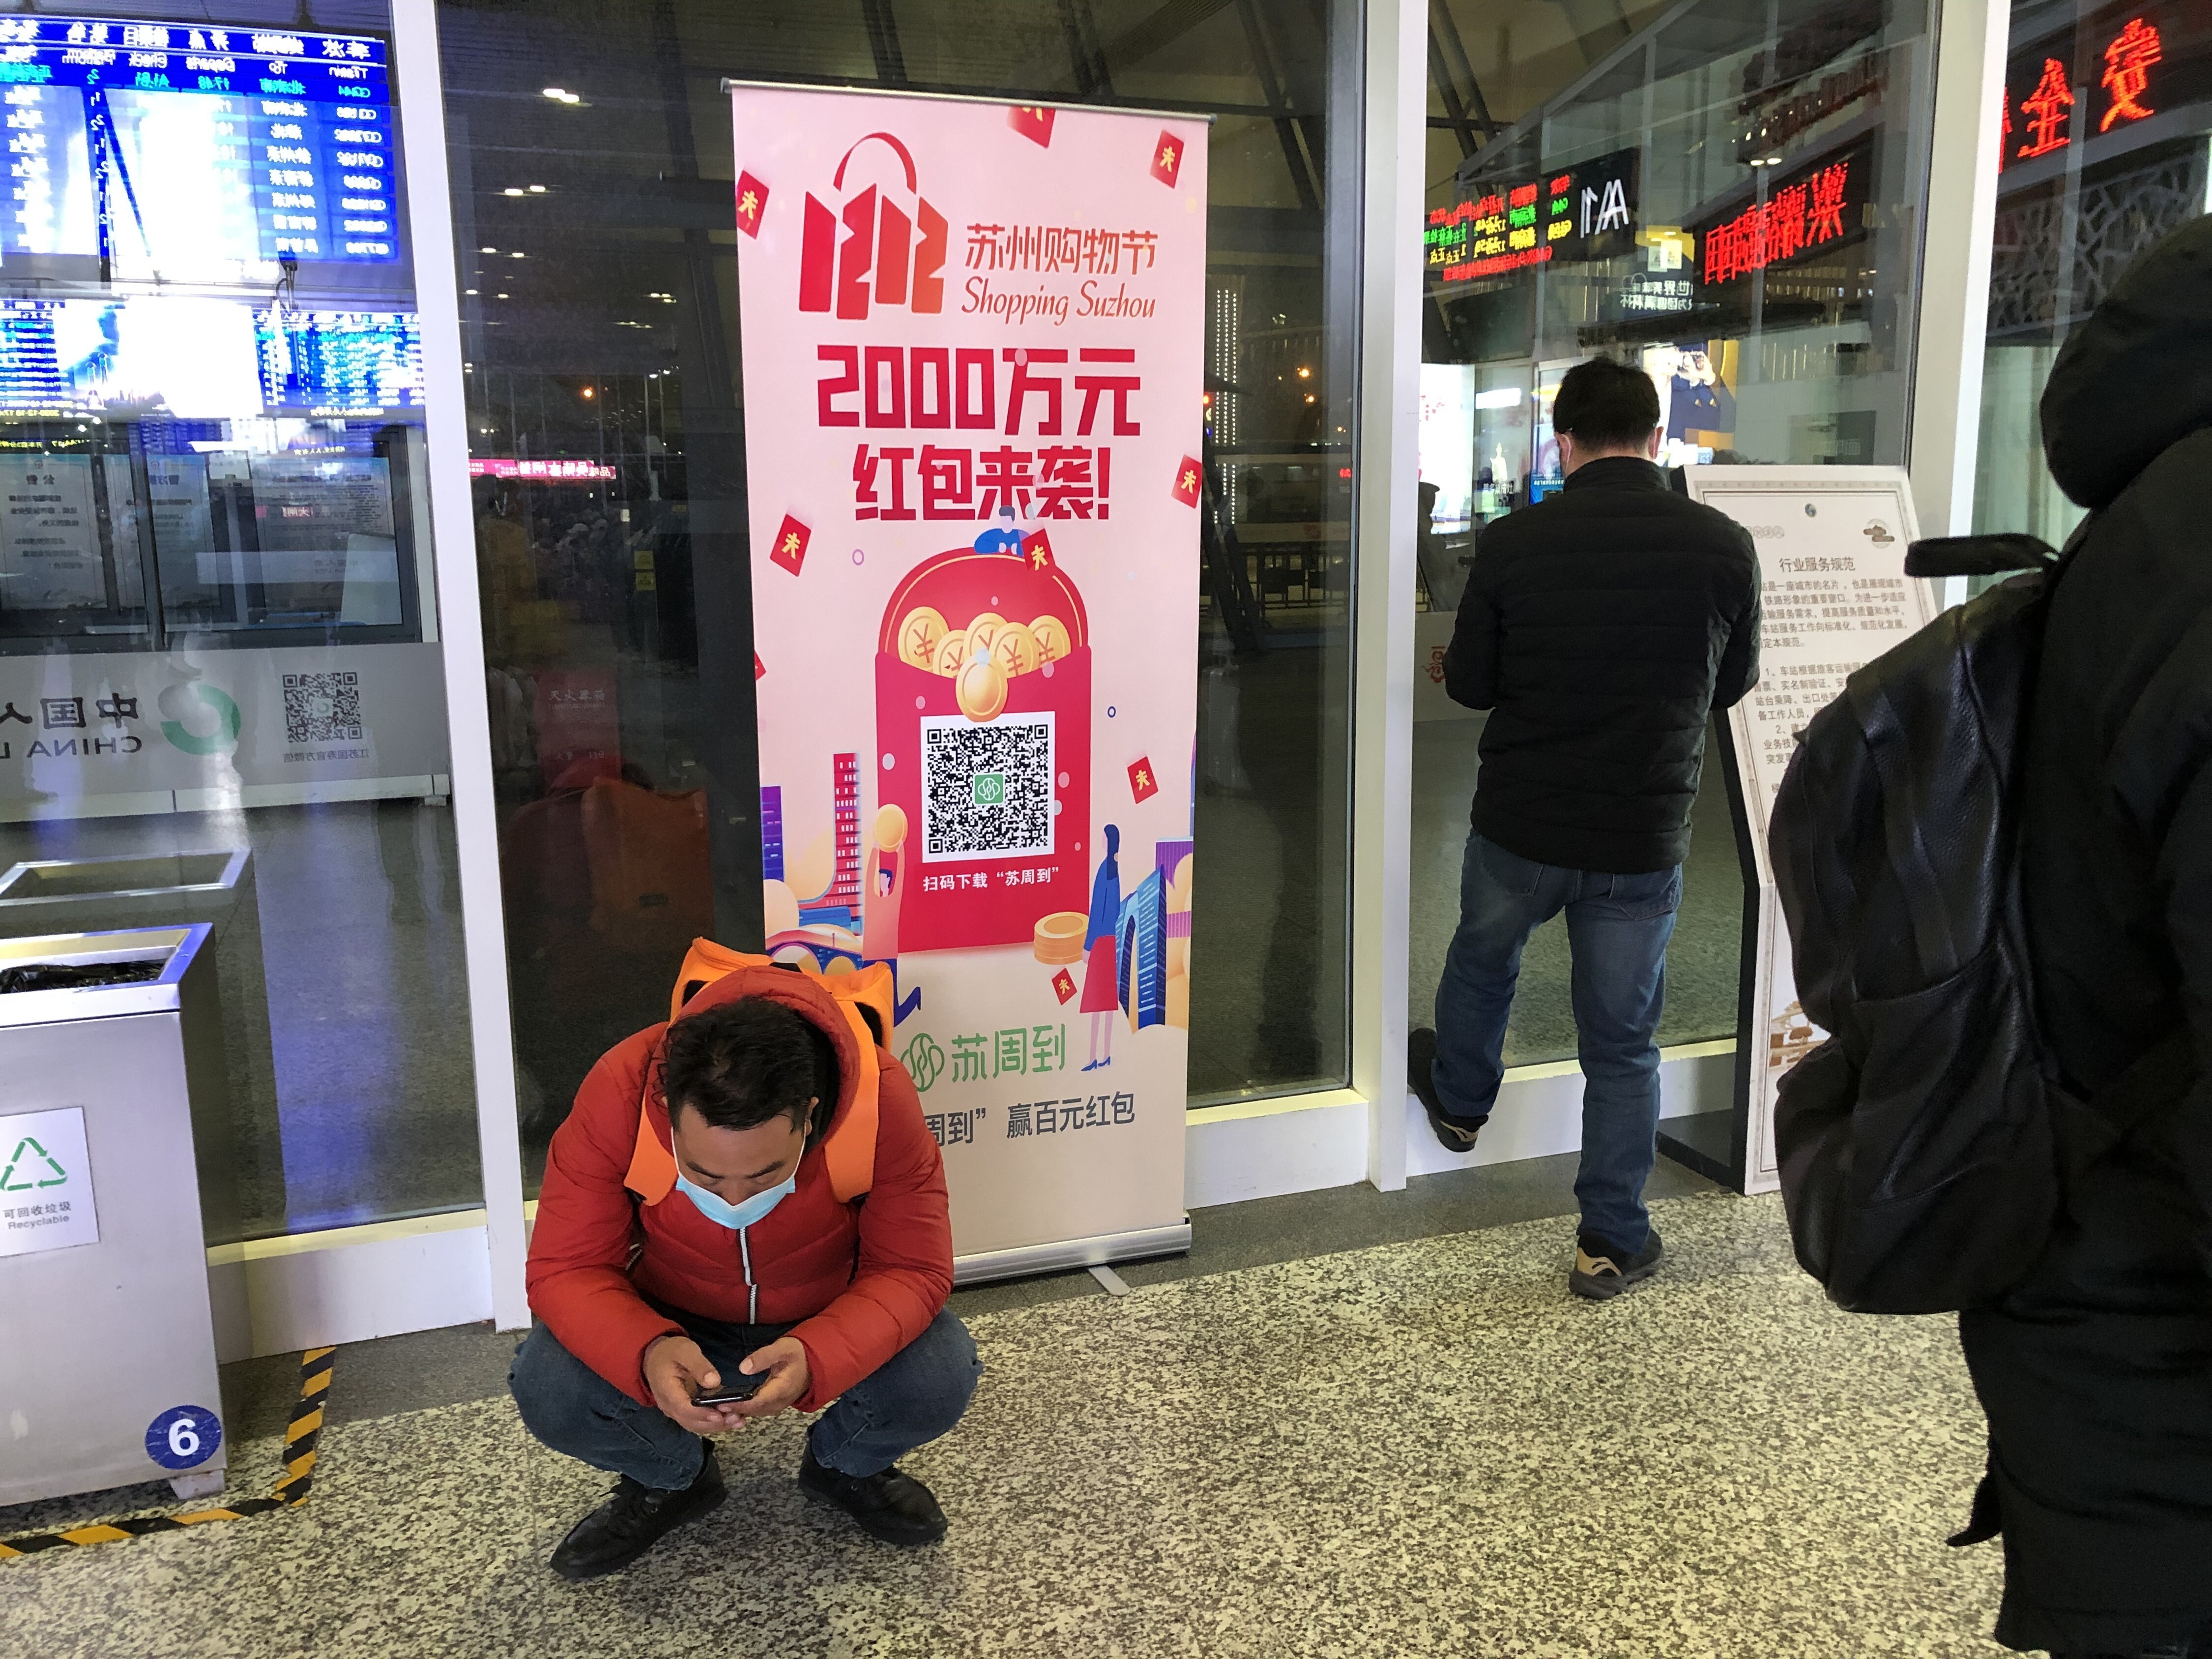 A banner promoting China’s digital yuan trial is displayed at the Suzhou North High Speed Train Station on December 21, 2020. Photo: Orange Wang